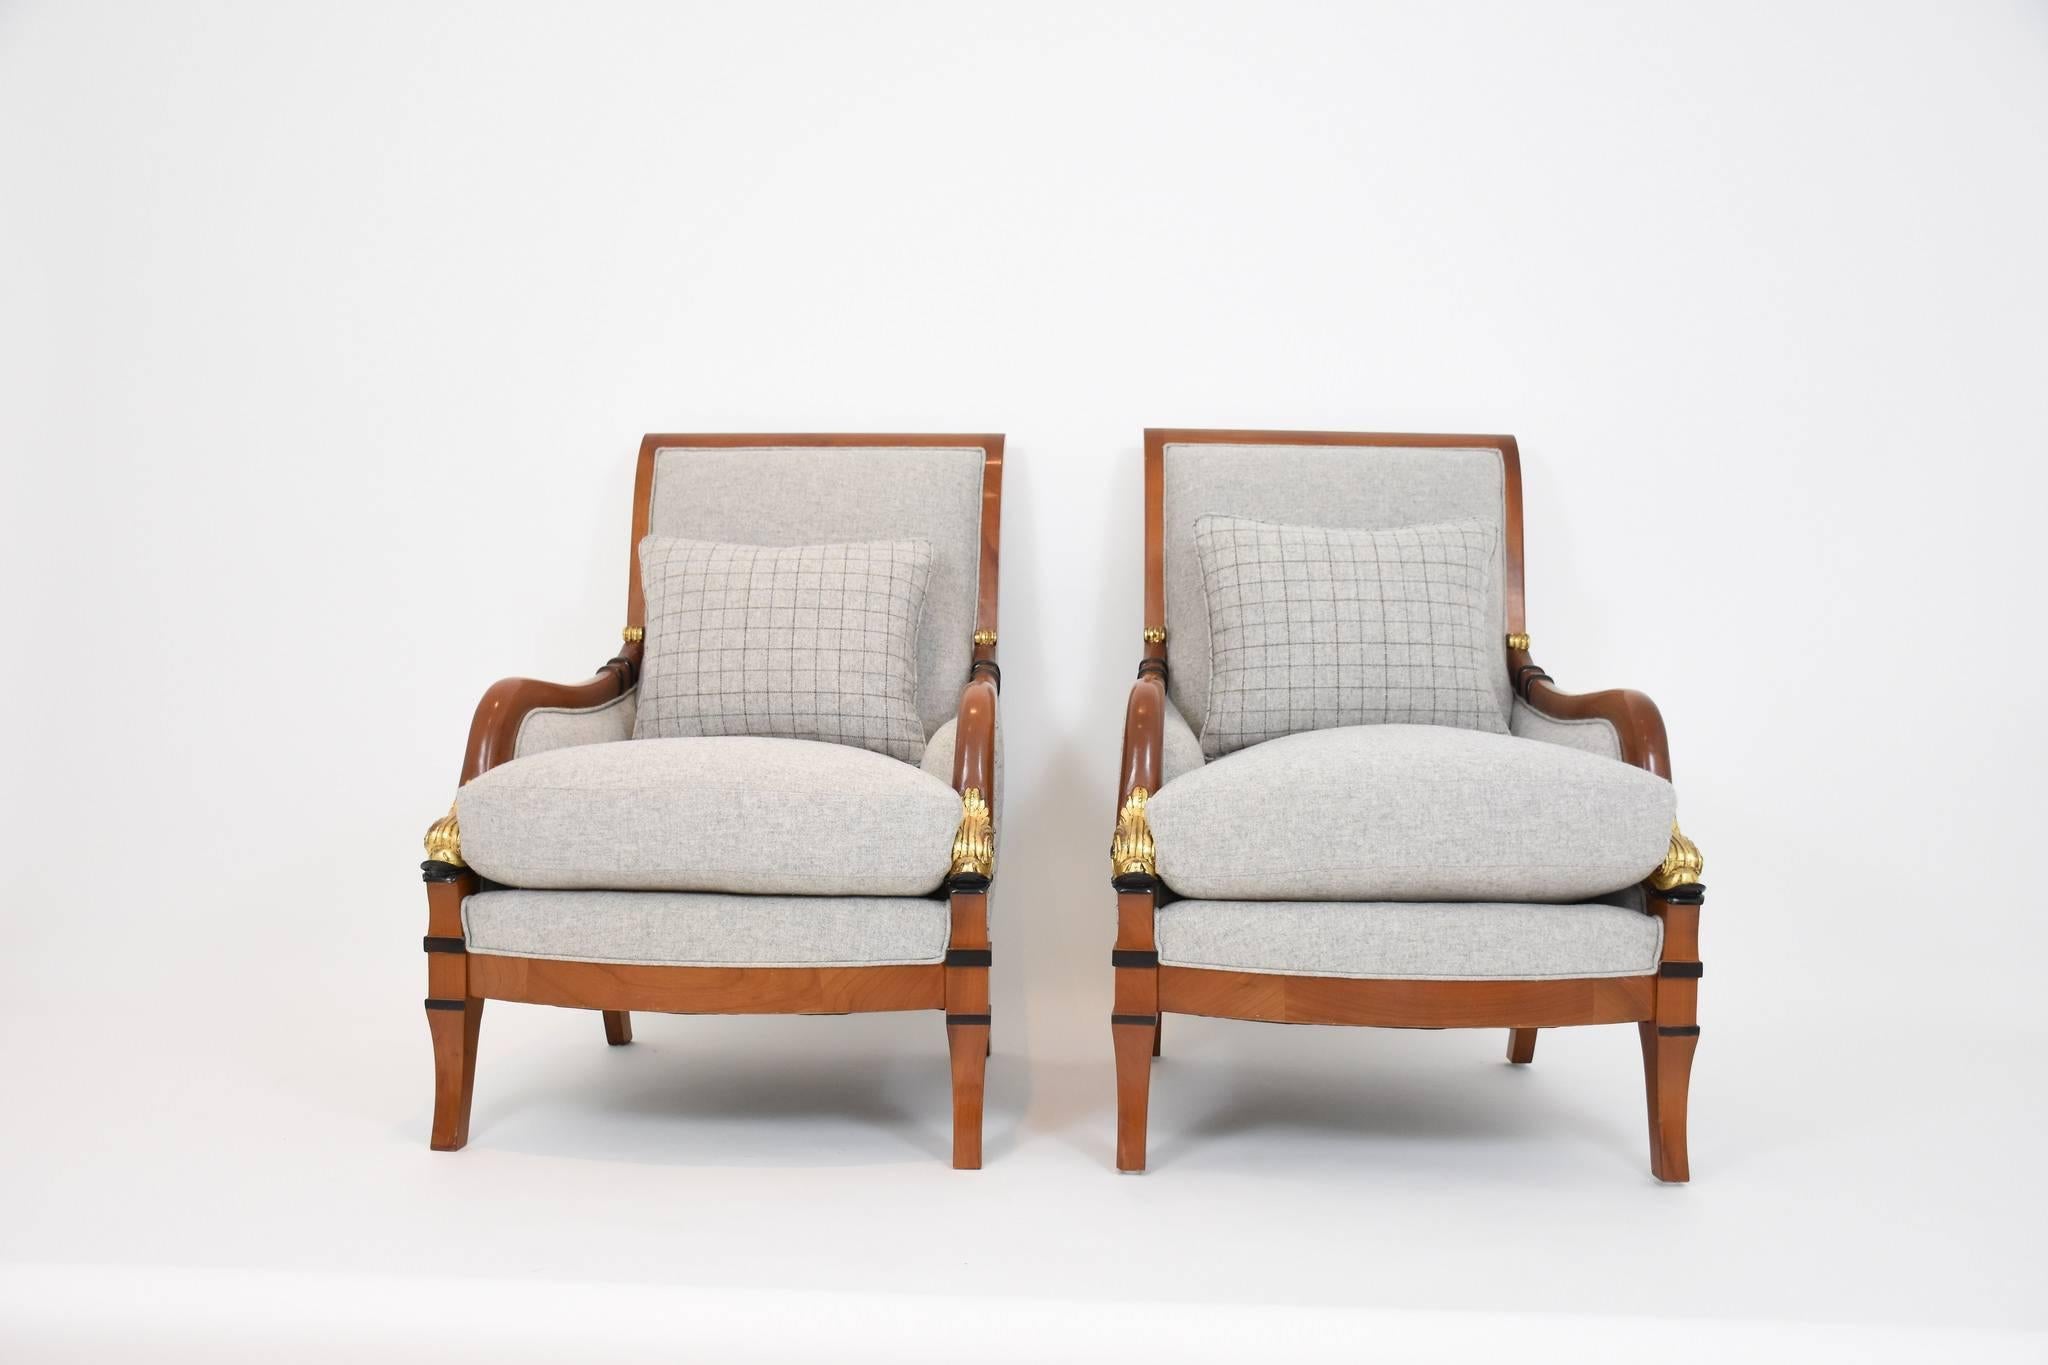 A pair of vintage fruitwood Biedermeier style carved dolphin bergéres with black patinated and gold gilt detailing. Chairs are newly rebuilt upholstered in a grey and grey checked wool blend with coordinating lumbar pillow.